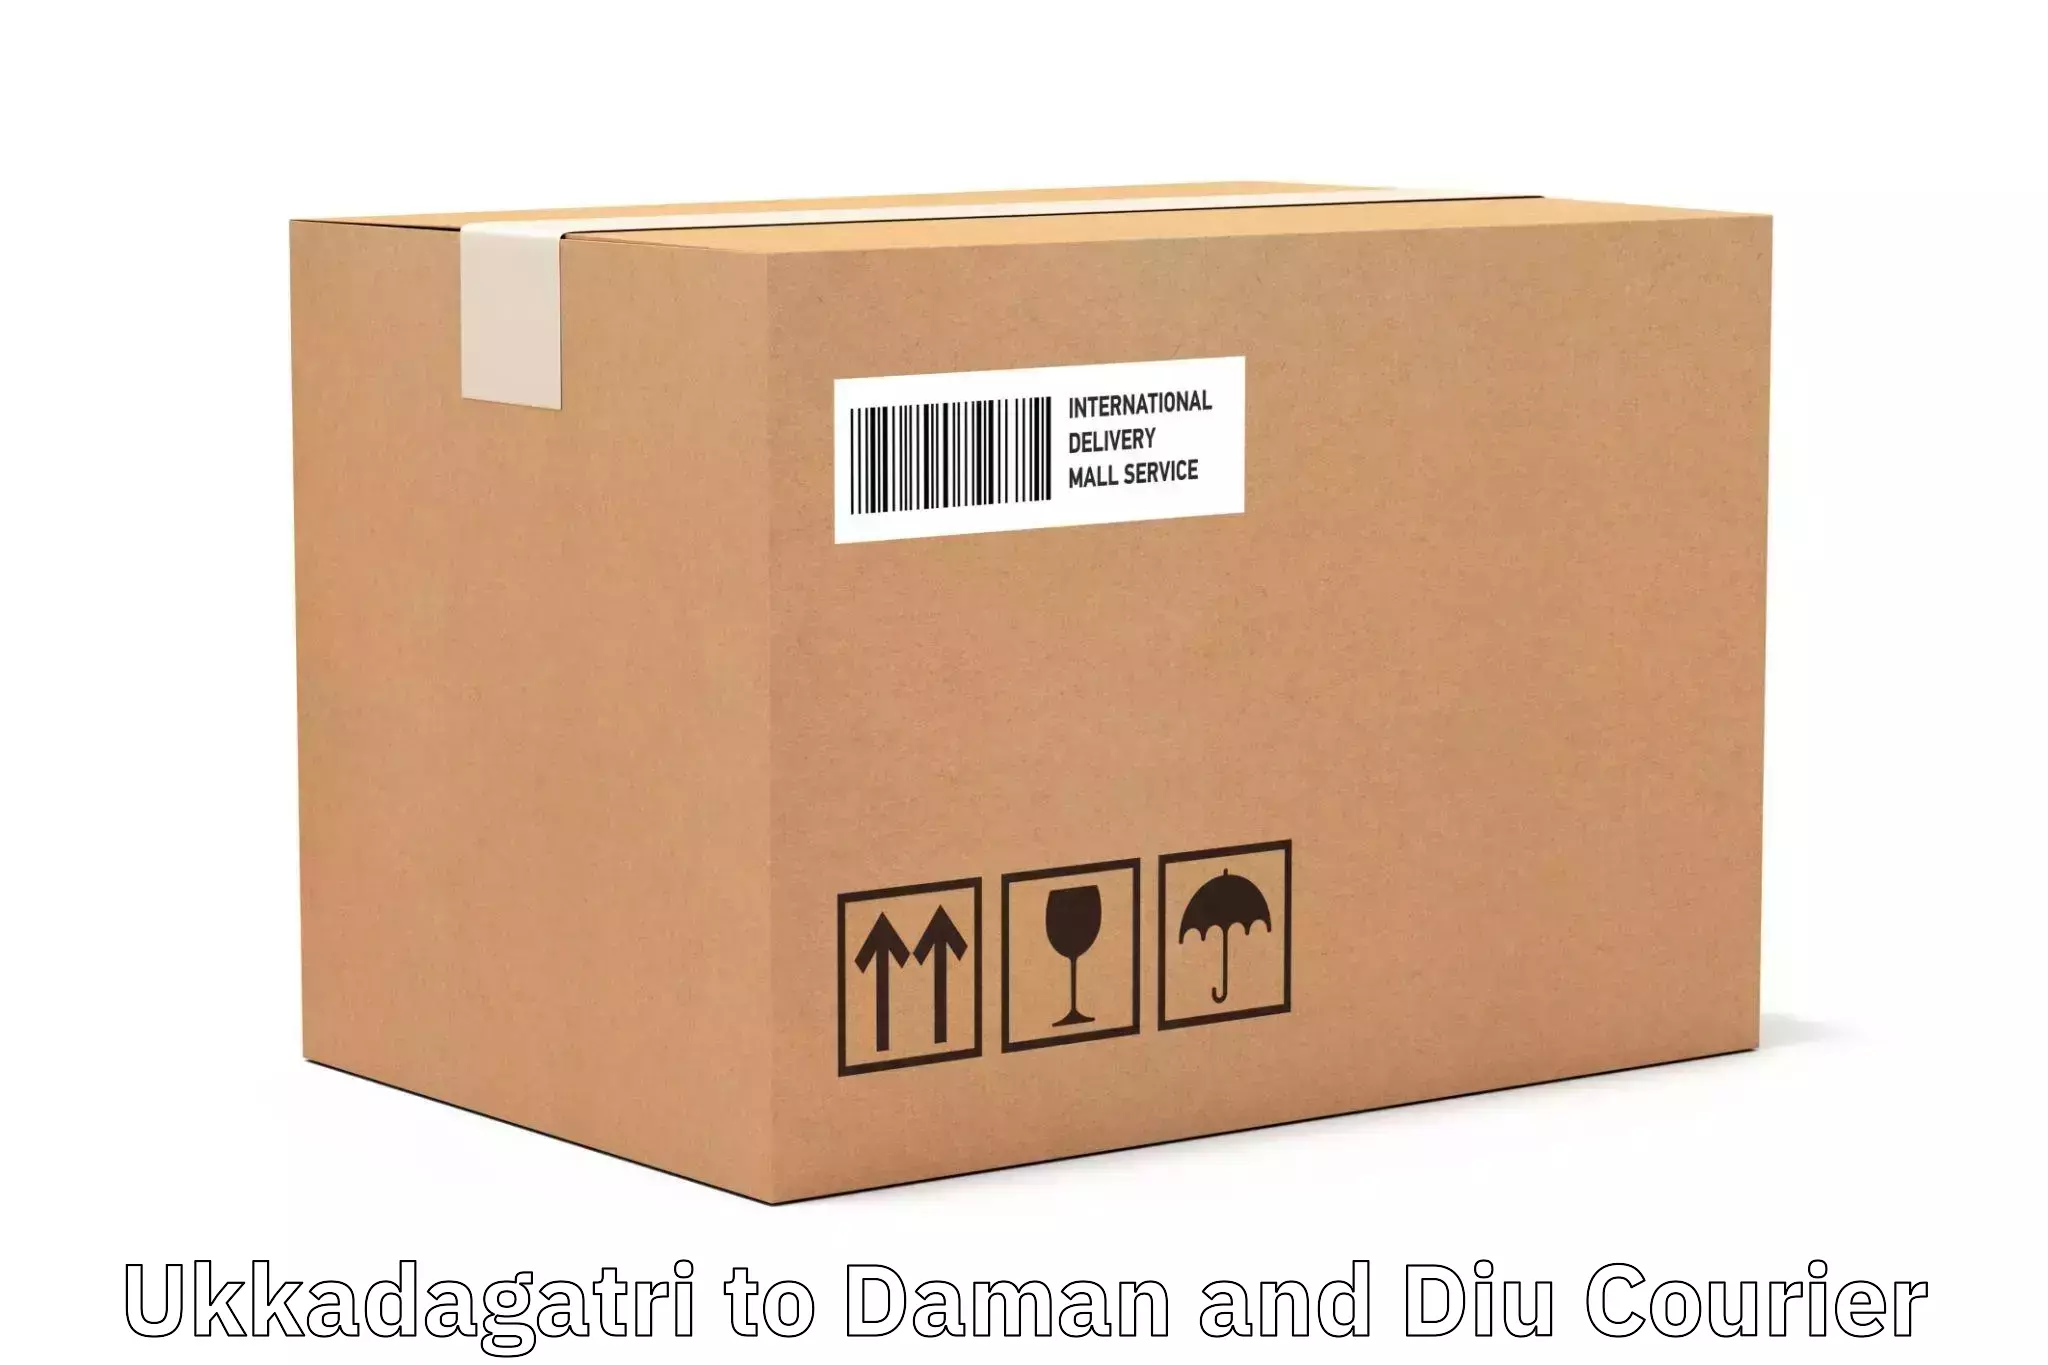 Secure package delivery Ukkadagatri to Daman